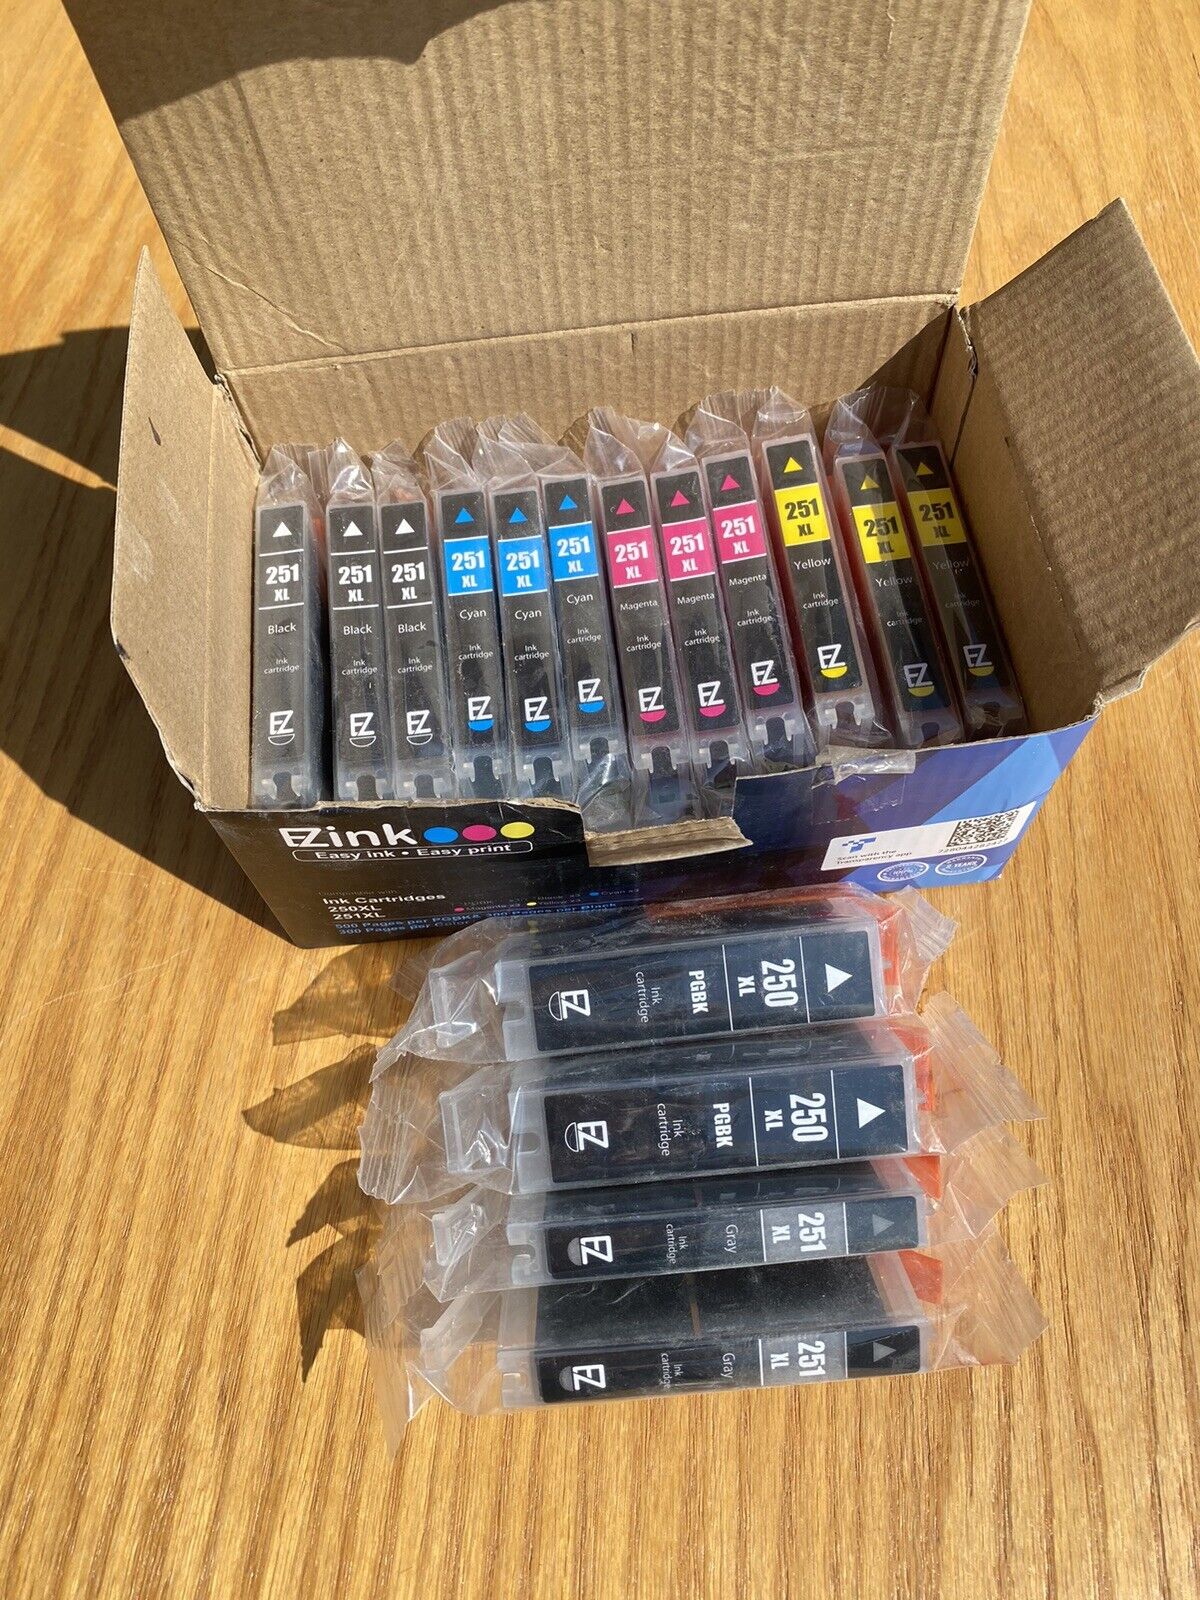 Lot of 16 Canon Printer EZ Blue Pink Black Yellow Gr Ink Cartridges New & Sealed